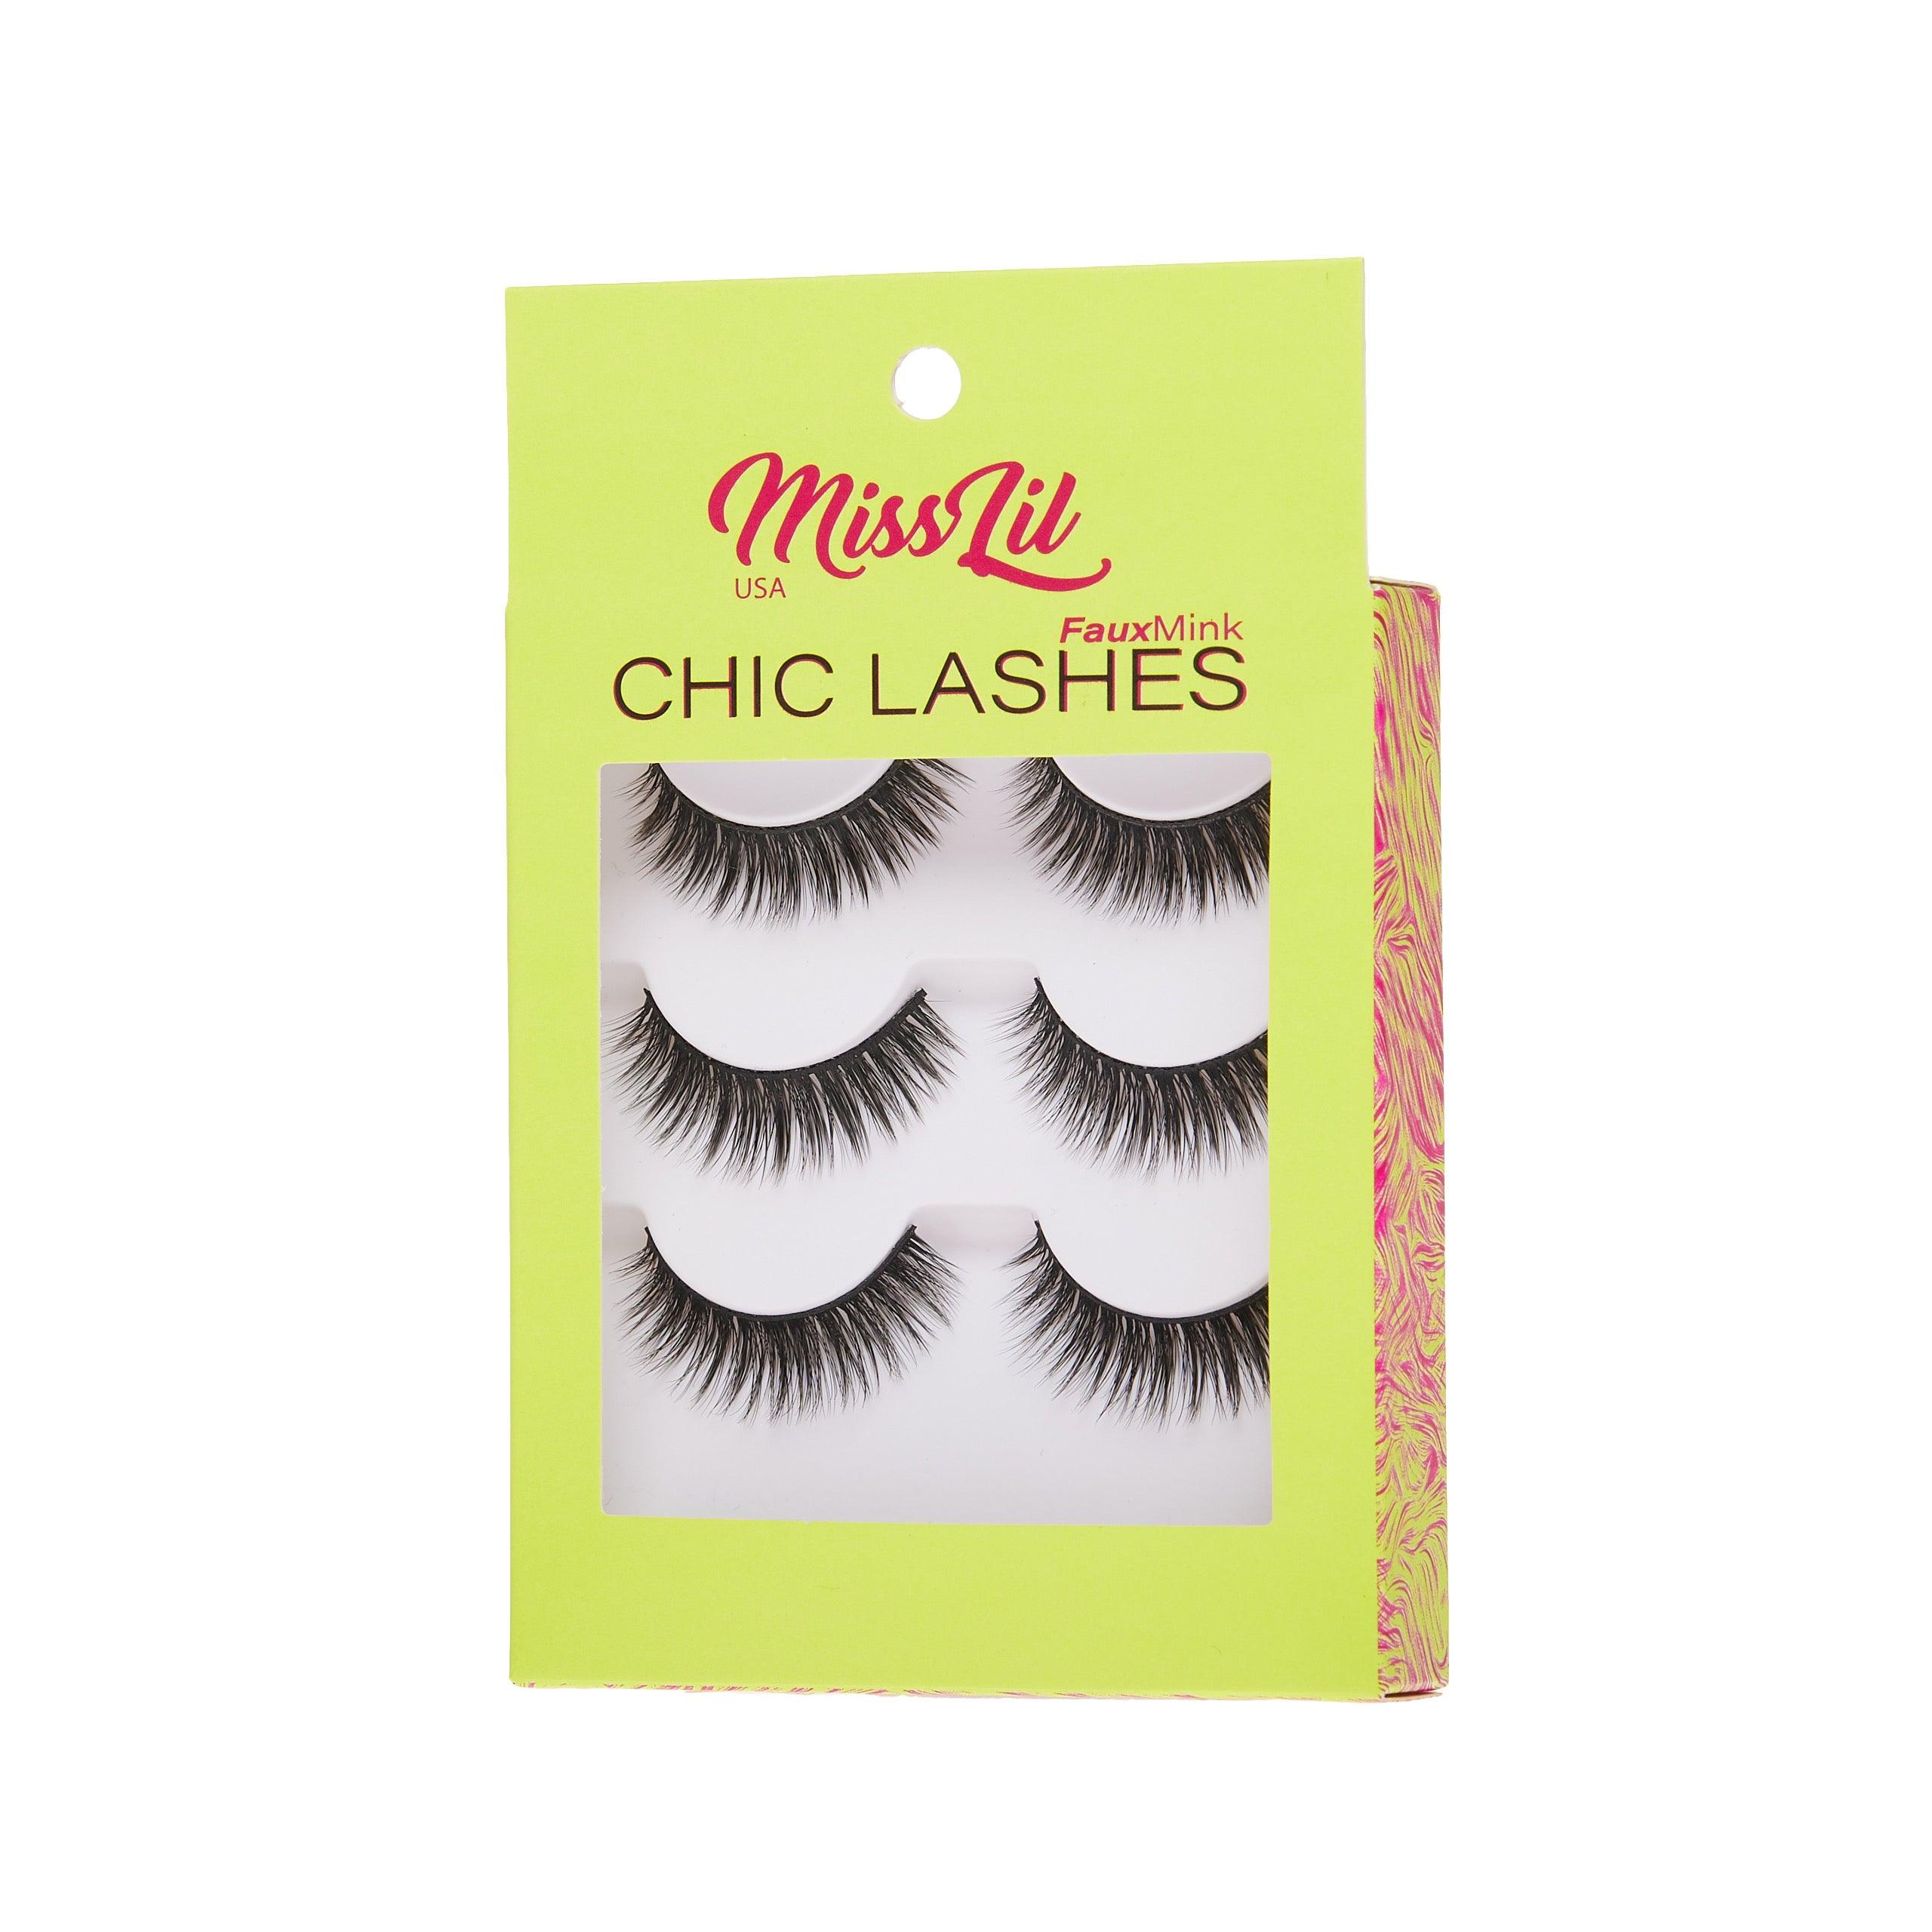 3-Pair Faux Mink Eyelashes - Chic Lashes Collection #28 - Pack of 3 - Miss Lil USA